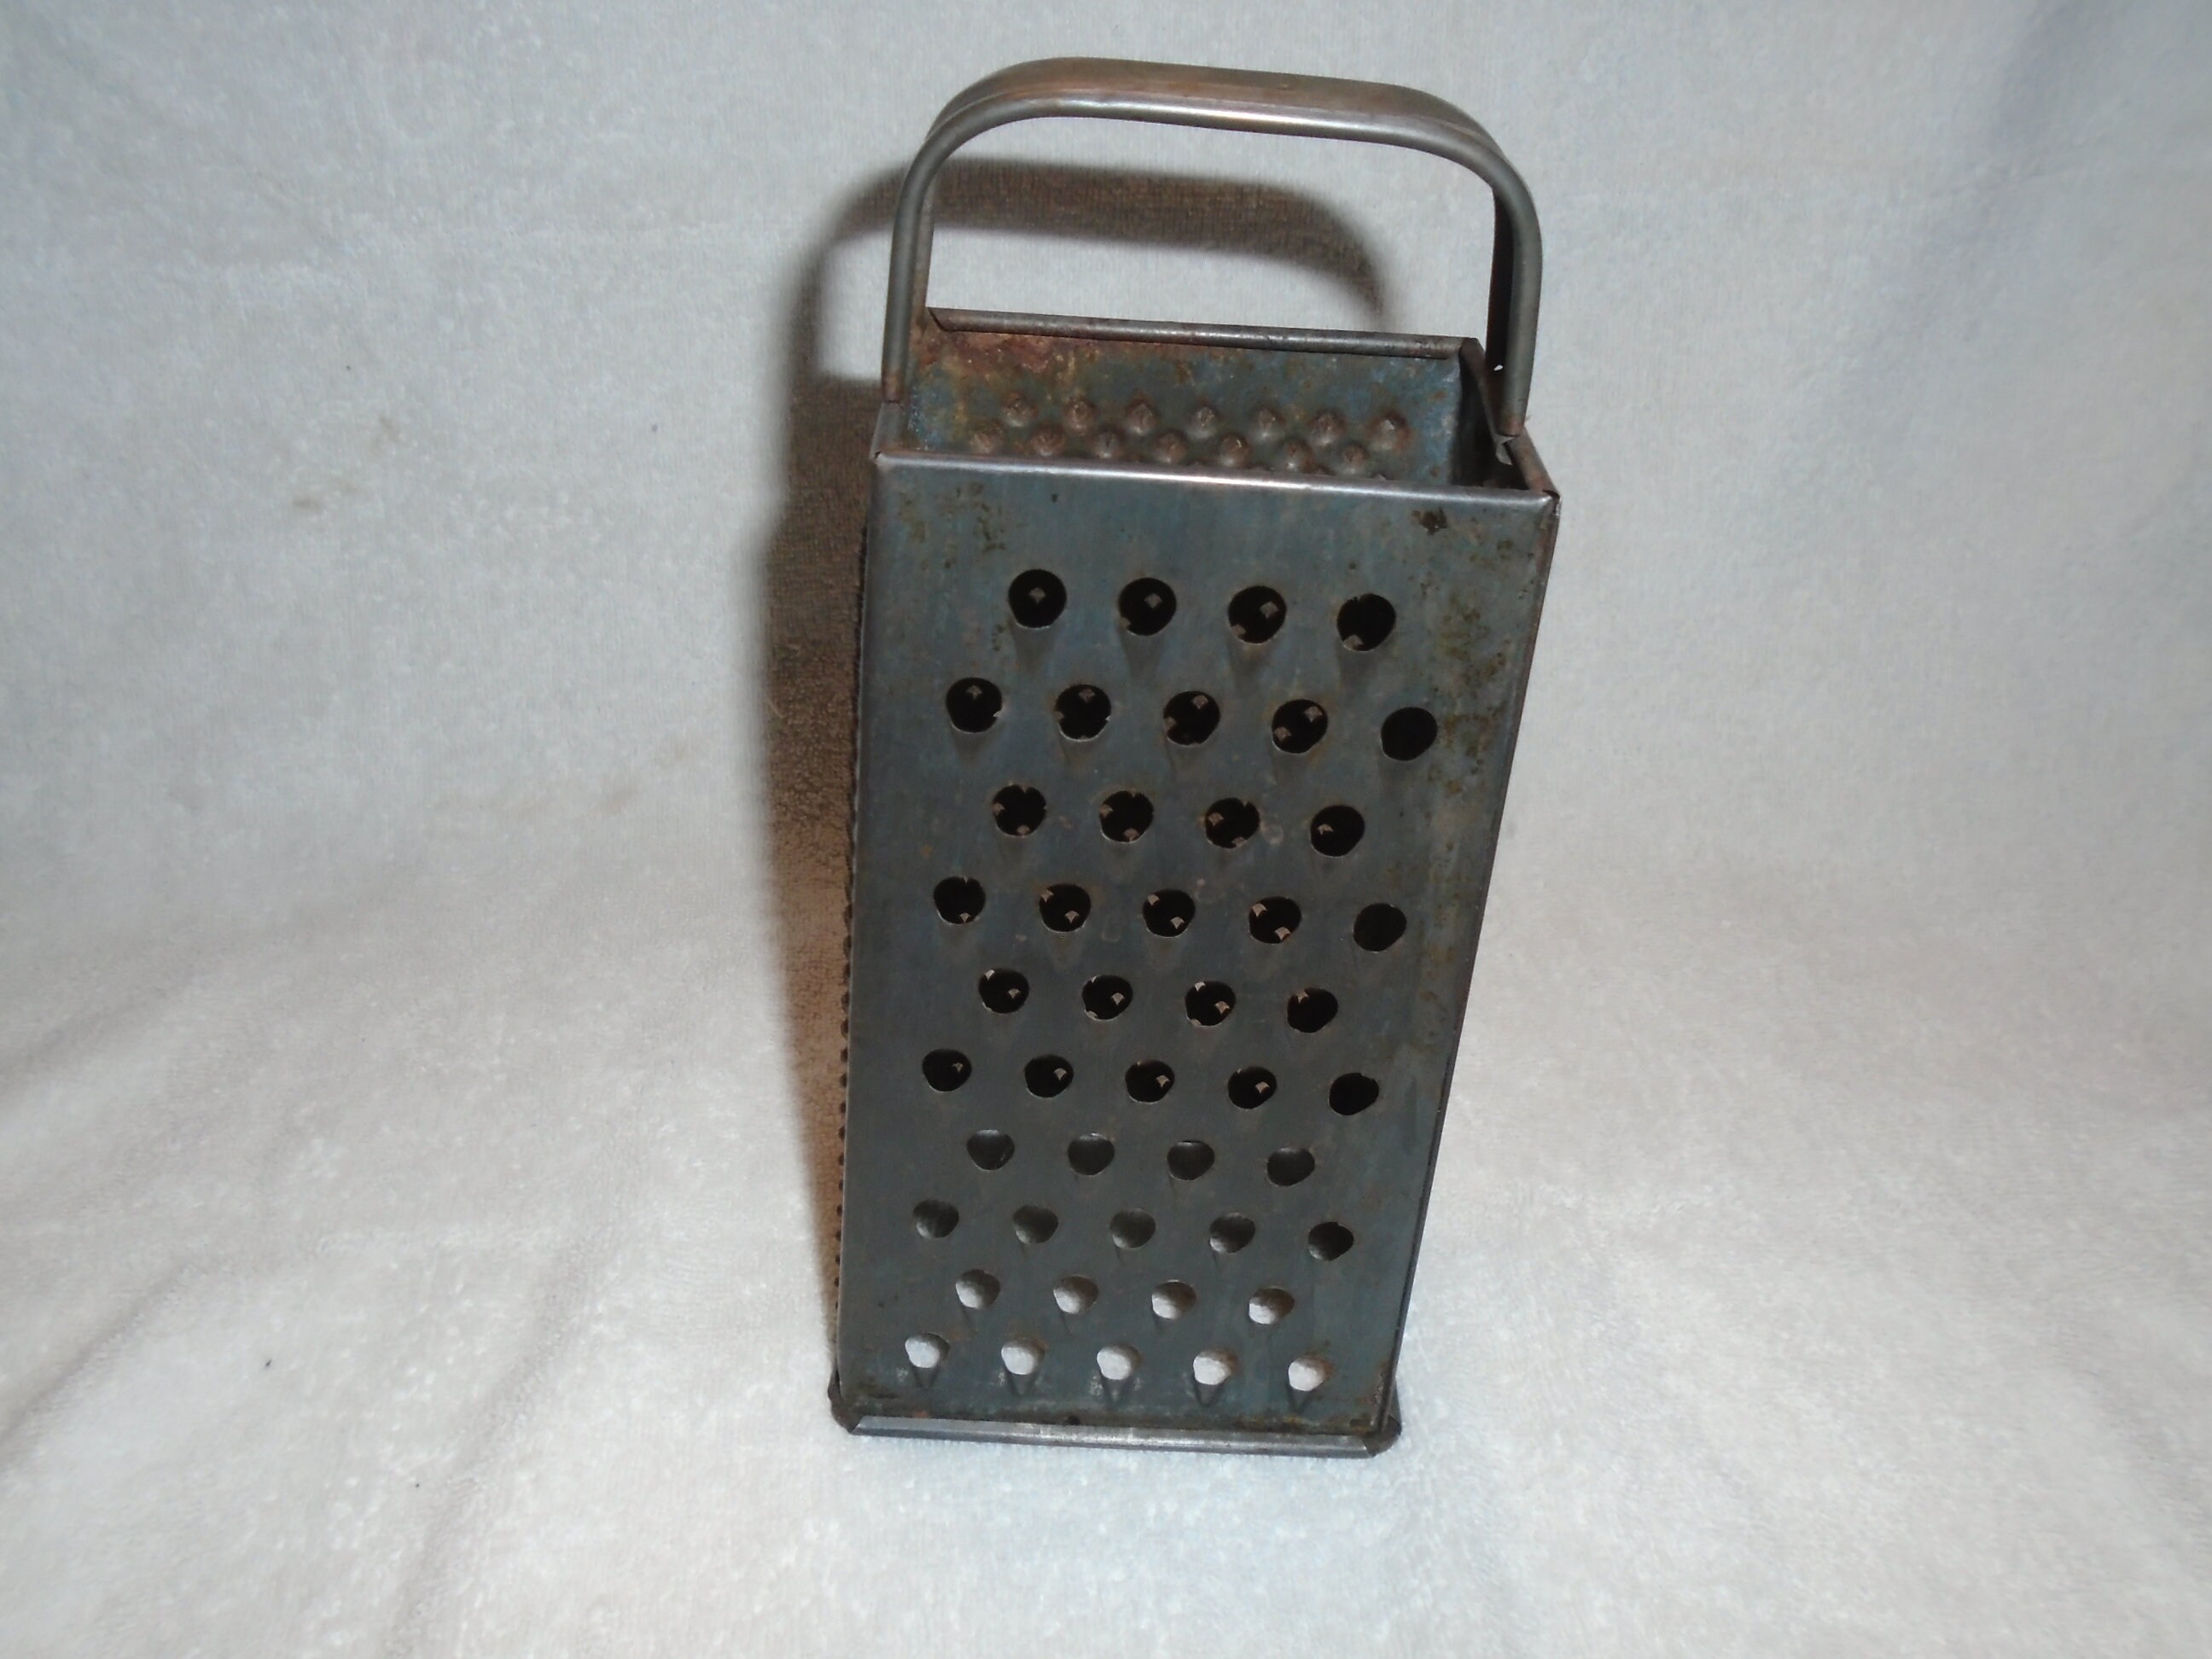 Vintage Table Top Cast Iron Nut Grinder Cheese Grater #820 Antique